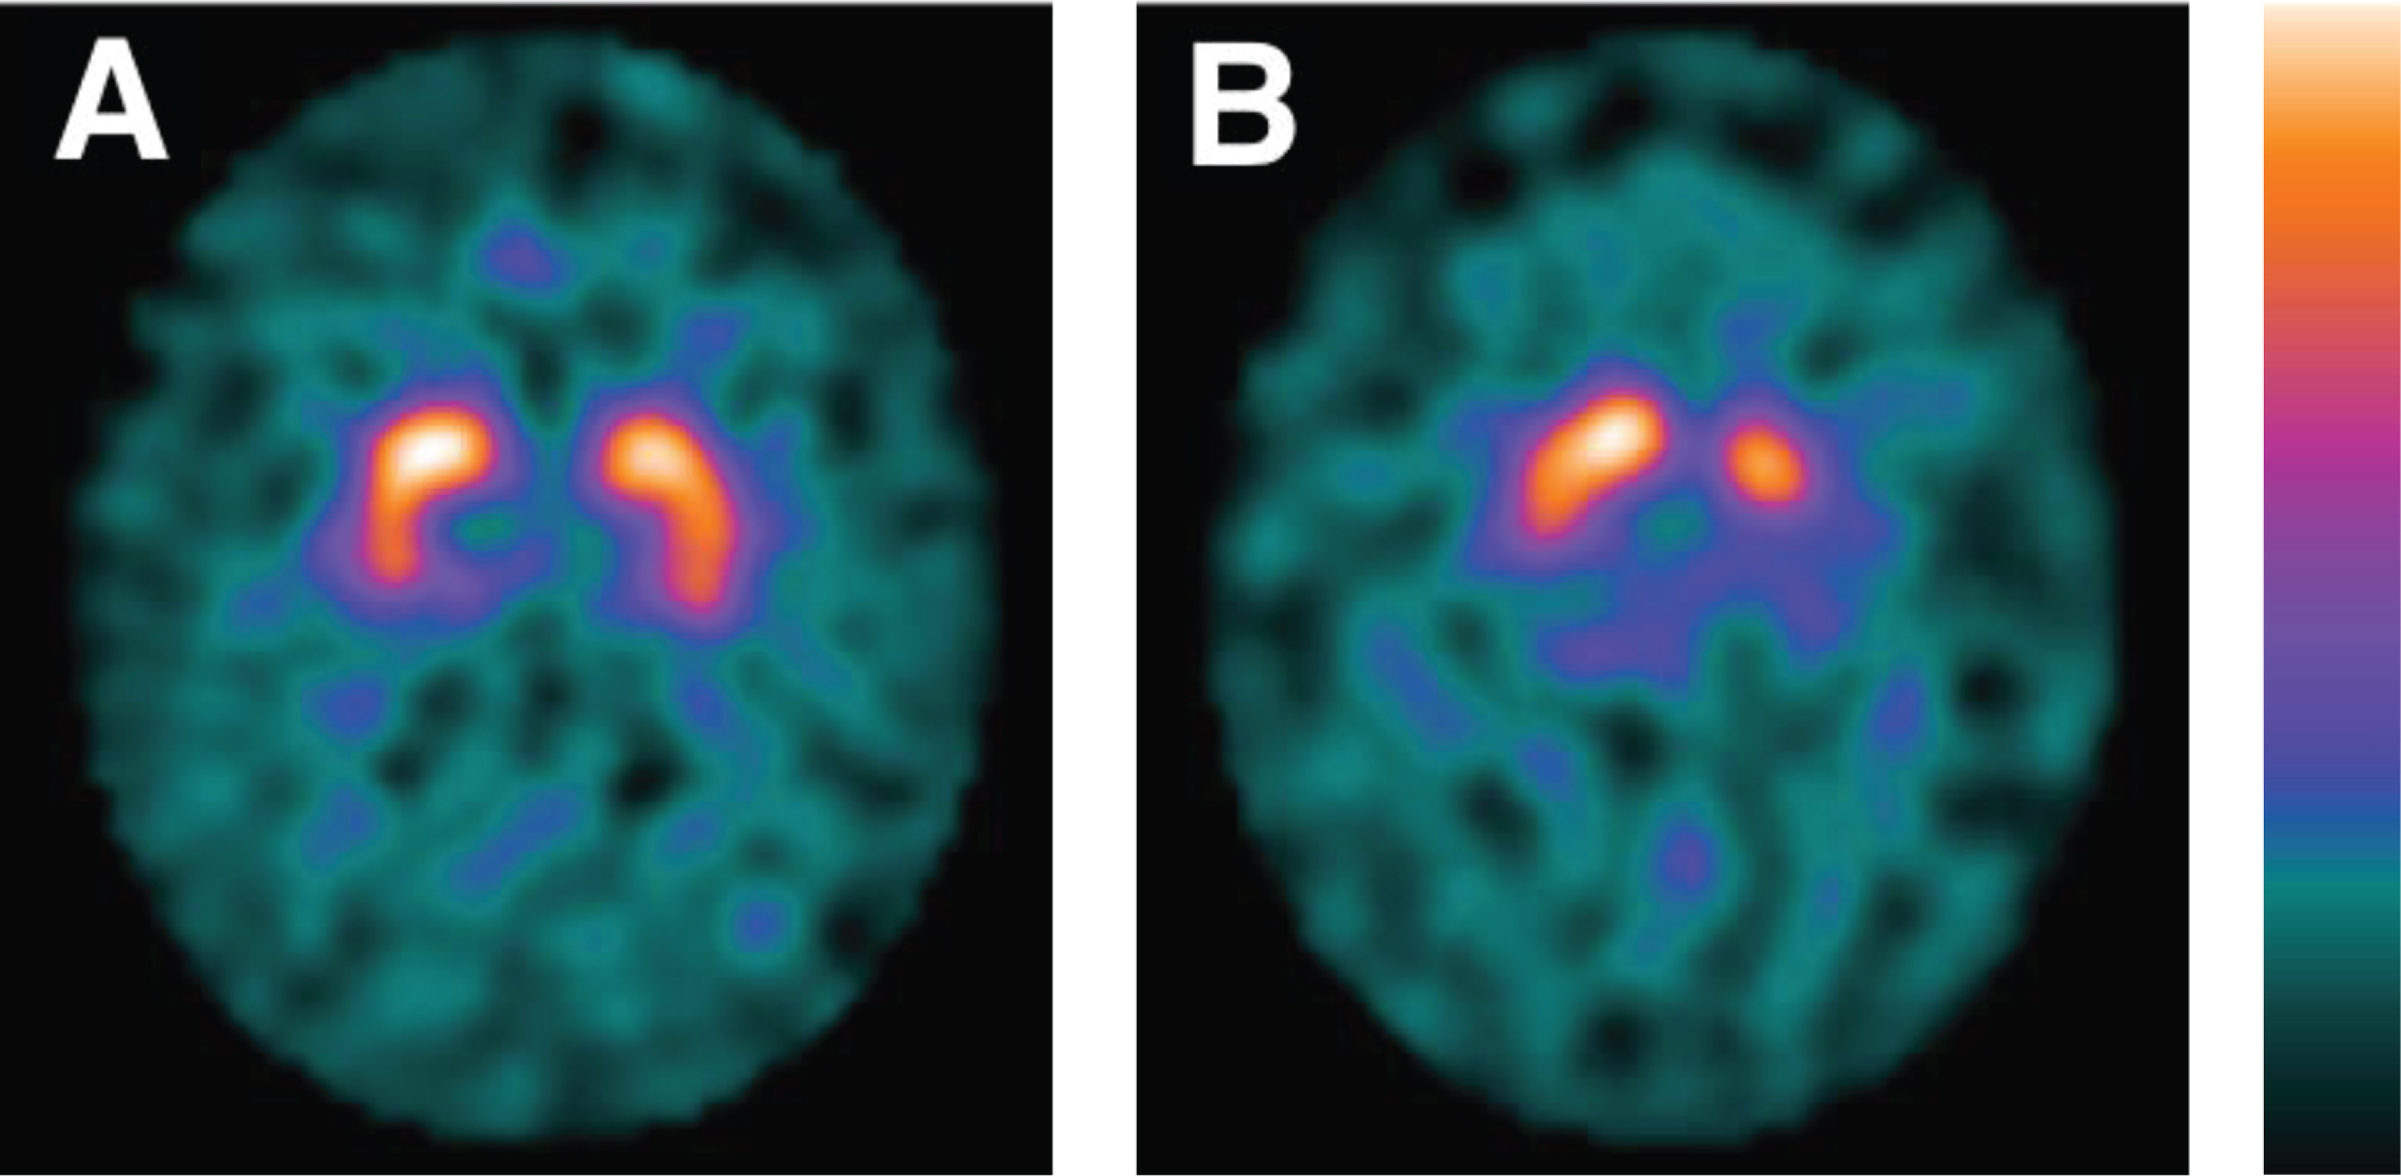 DAT SPECT imaging. Normal (A) and abnormal (B) [123I]FP-CIT SPECT imaging of patients in the LEAP-cohort. Patient A is a 64-year-old male. Patient B is a 63-year-old female. DAT, dopamine transporter; SPECT; single-photon emission computed tomography; LEAP, Levodopa in EArly Parkinson’s disease.